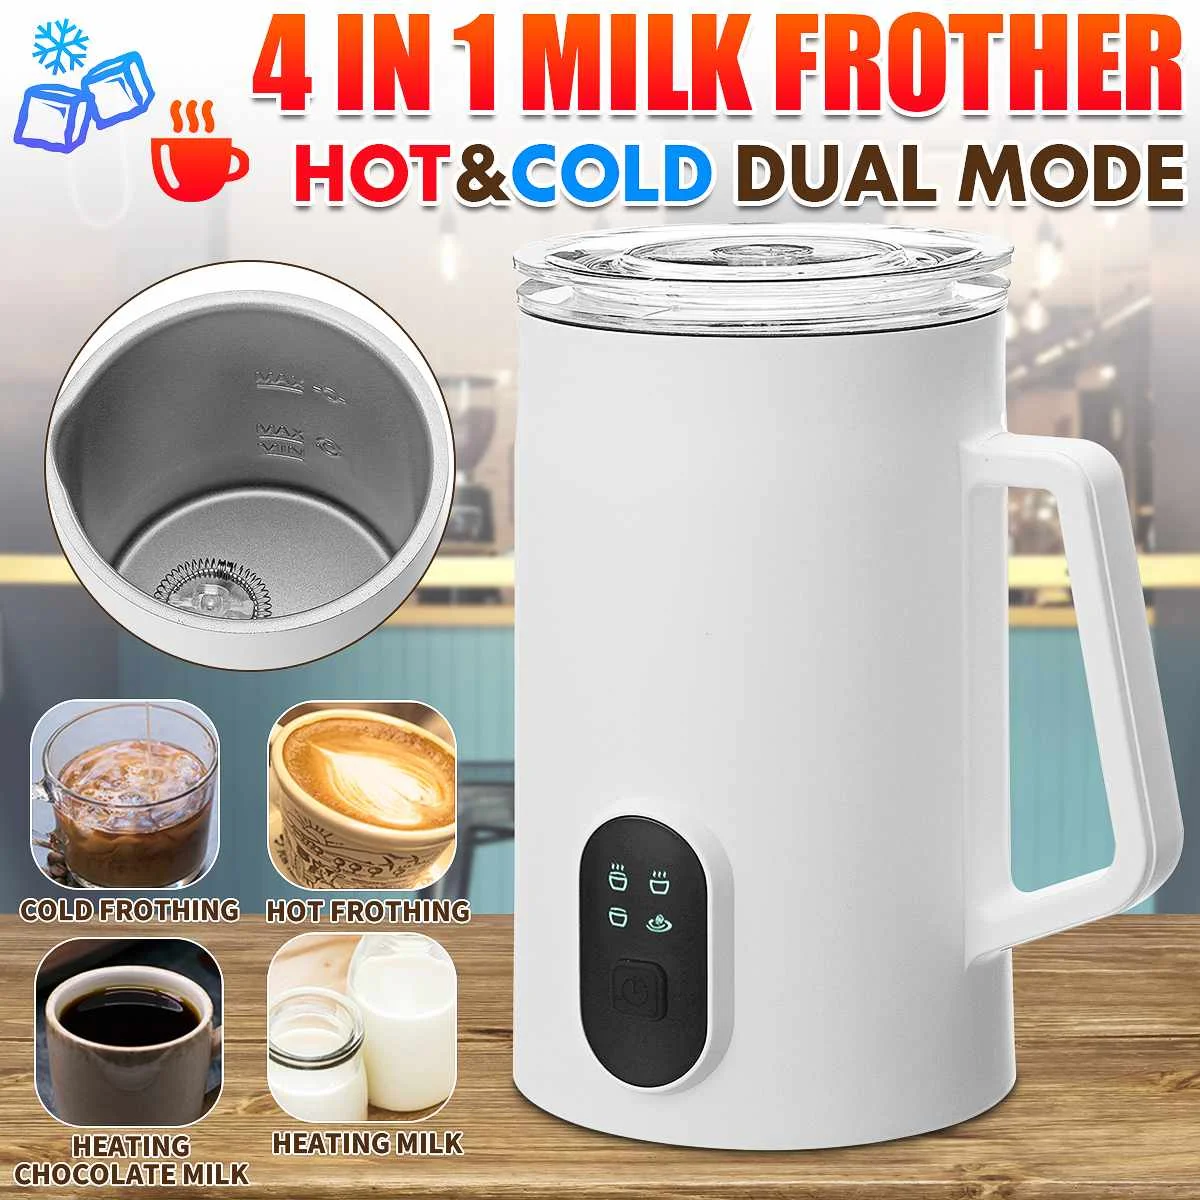 New 4 in 1 Milk Frother Frothing Foamer Fully automatic Milk Warmer Cold/Hot Latte Cappuccino Chocolate Foam Maker for Coffee